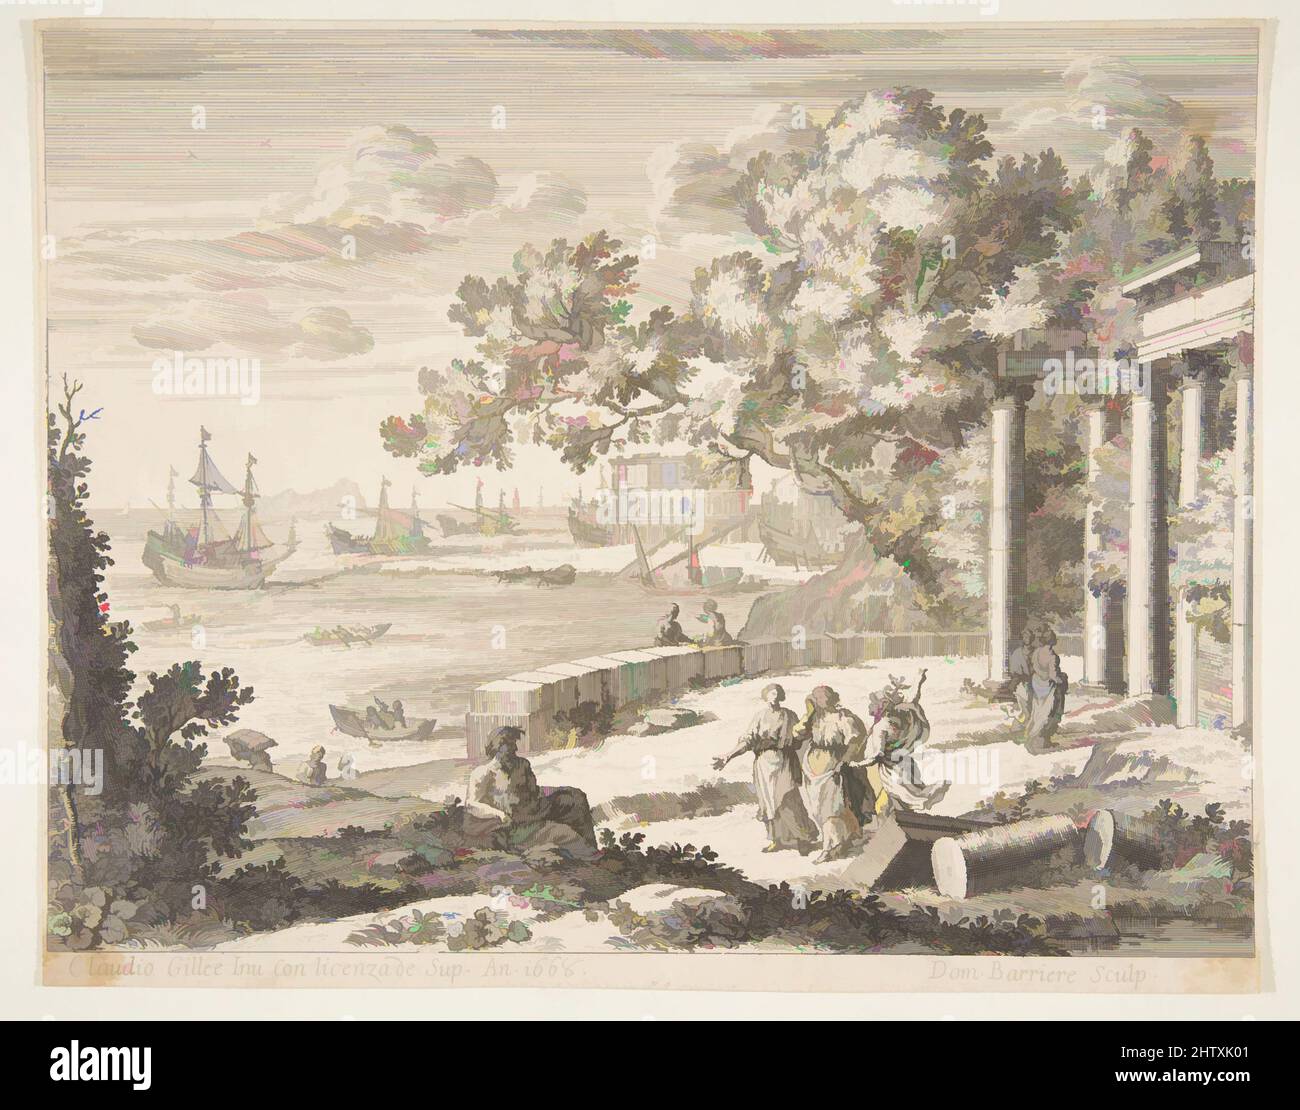 Art inspired by Landscape with Mercury, 1668, Etching, sheet: 7 7/8 x 9 7/8 in. (20 x 25.1 cm), Prints, After Claude Lorrain (Claude Gellée) (French, Chamagne 1604/5?–1682 Rome), Etched by Dominique Barrière (French, Marseille 1610–1678, Classic works modernized by Artotop with a splash of modernity. Shapes, color and value, eye-catching visual impact on art. Emotions through freedom of artworks in a contemporary way. A timeless message pursuing a wildly creative new direction. Artists turning to the digital medium and creating the Artotop NFT Stock Photo